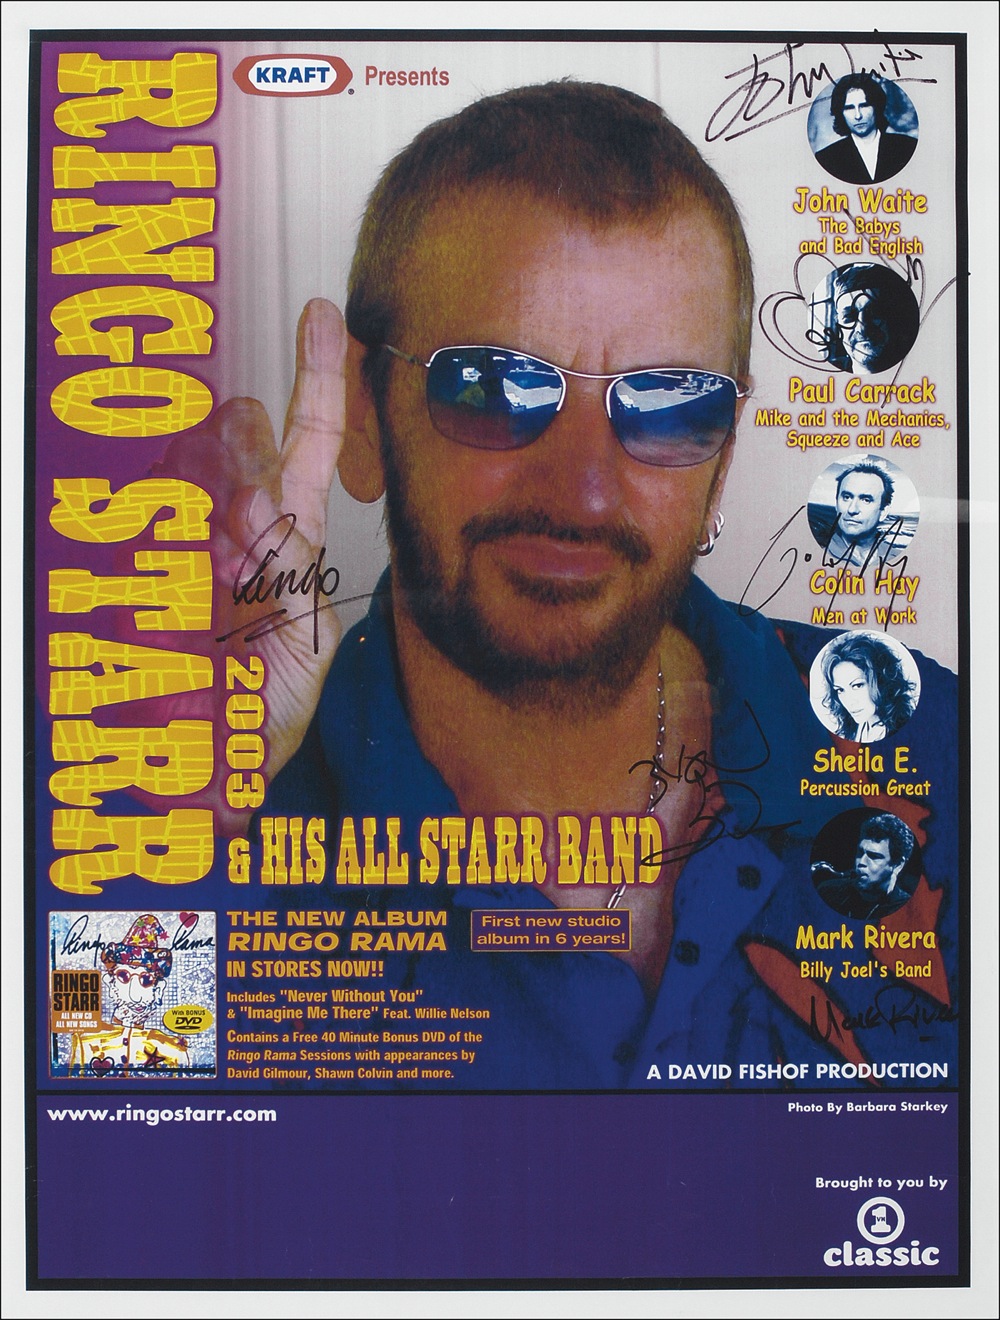 Lot #664 Beatles: Ringo Starr and his All Star